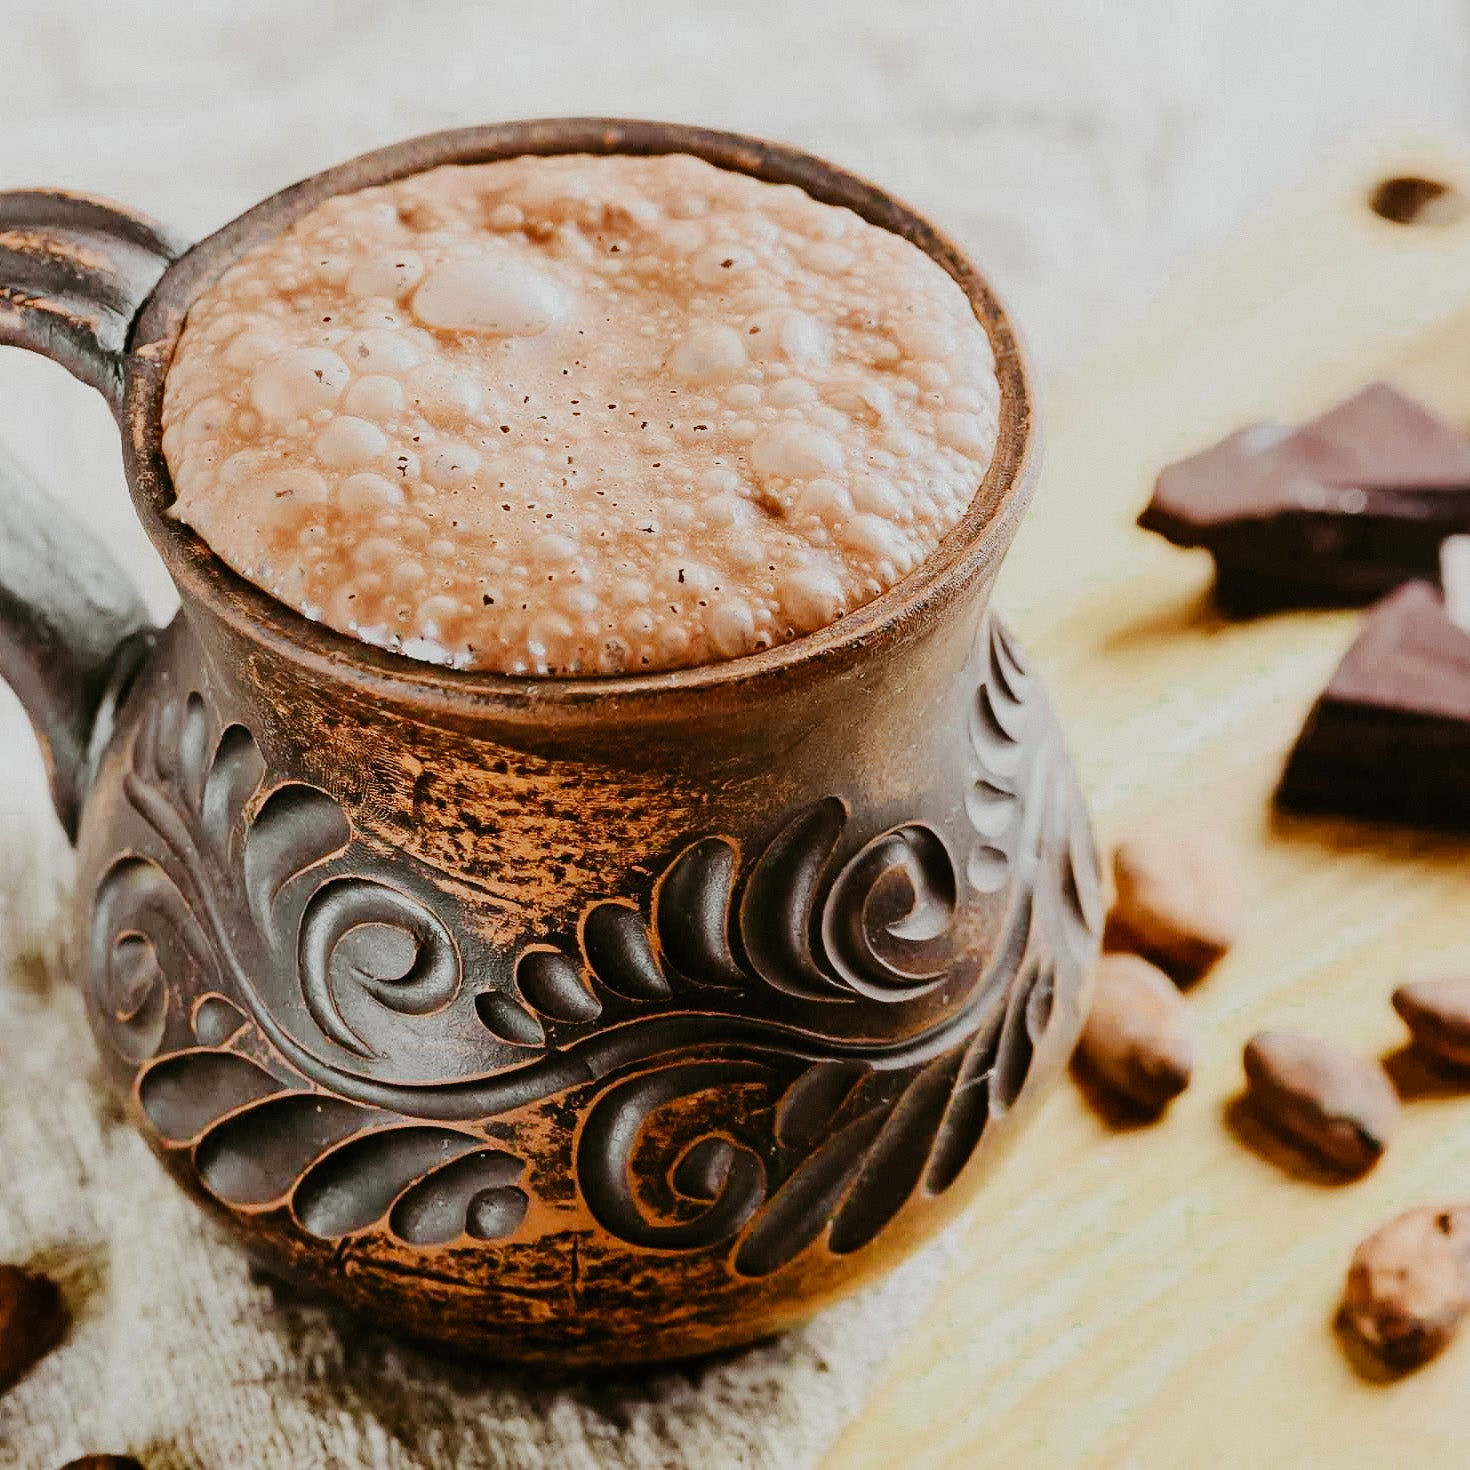  Cocoa and Cappuccino Fragrance Oil for Perfume Making